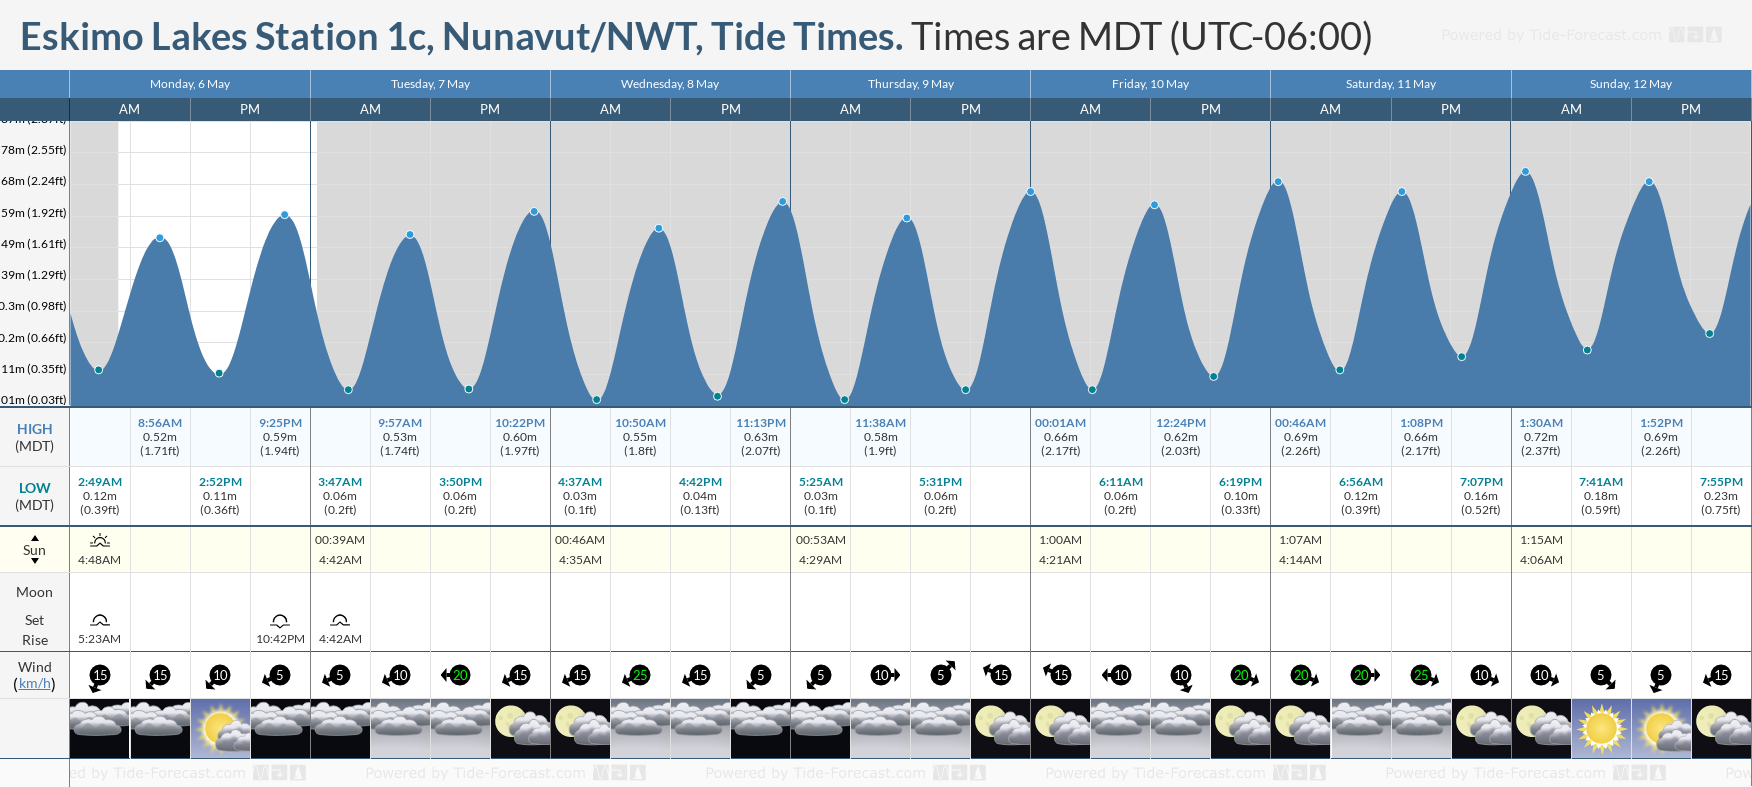 Eskimo Lakes Station 1c, Nunavut/NWT Tide Chart including high and low tide tide times for the next 7 days